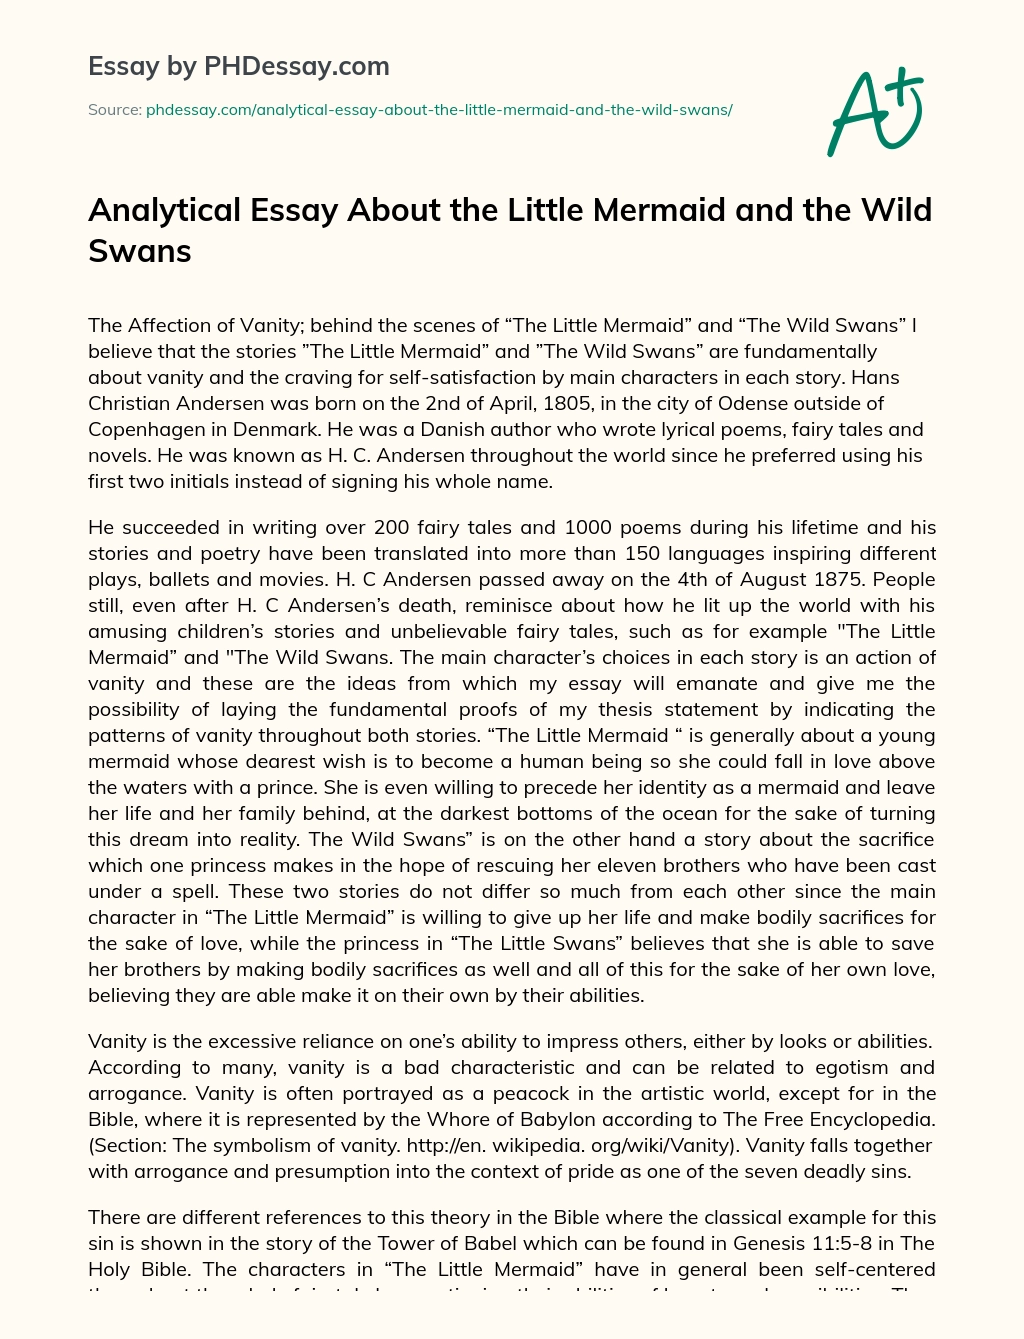 Analytical Essay About the Little Mermaid and the Wild Swans essay